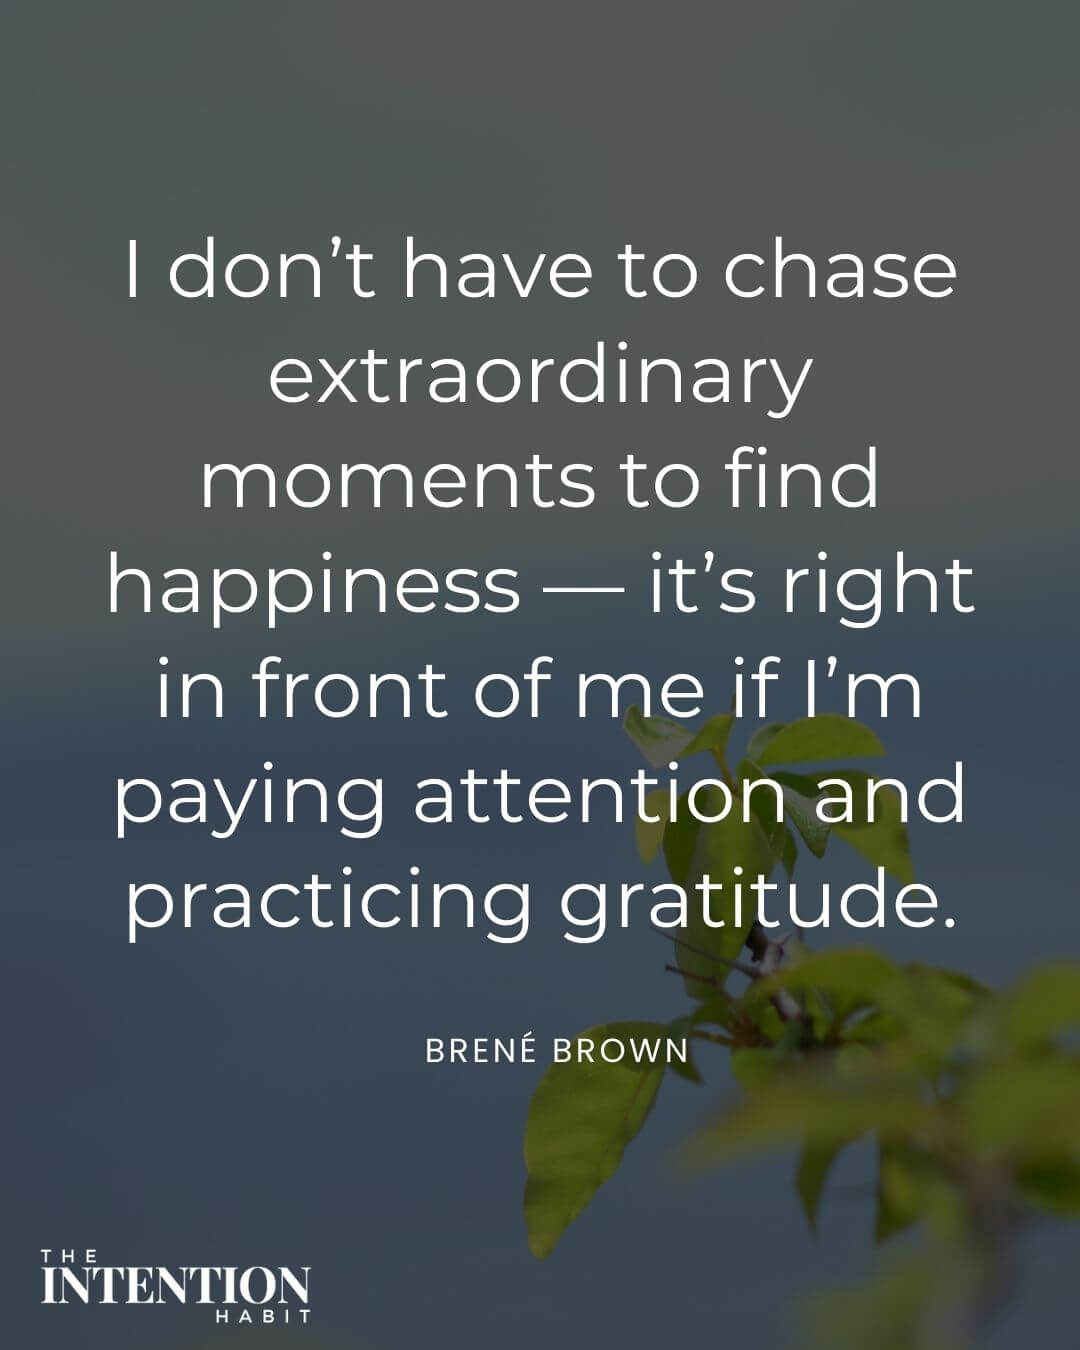 intentional living quote - i dont have to chase extrodinary moments to find happiness - its right in front of me if i'm paying attention and practicing gratitude